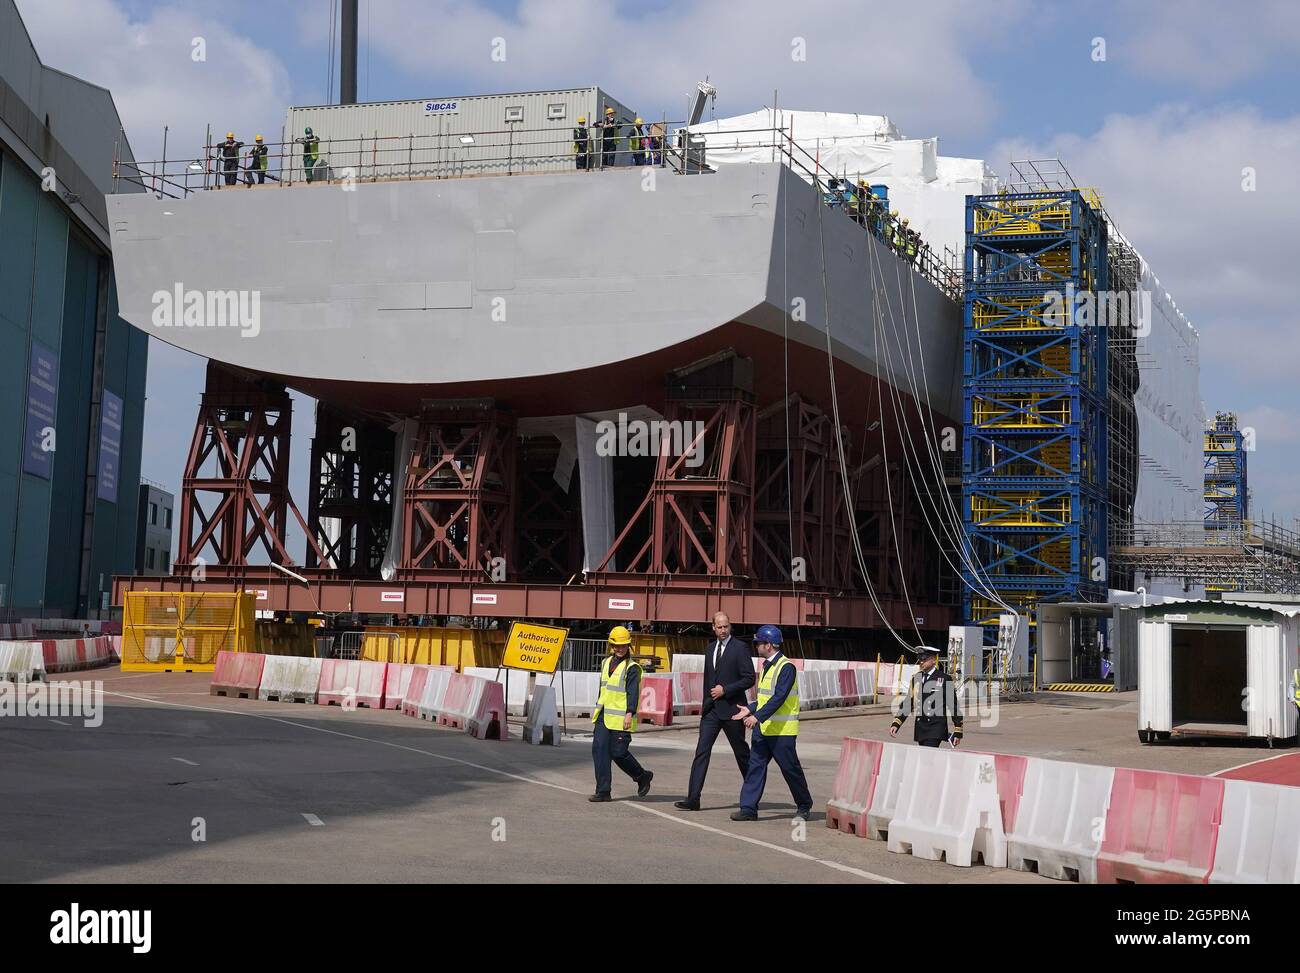 The Duke of Cambridge, known as the Earl of Strathearn in Scotland, alongside apprentice Cara Shannon as they view construction work on HMS Glasgow(in the background) during a visit to the BAE Systems shipyard in Glasgow, as part of a trip to Scotland for Holyrood Week. Picture date: Tuesday June 29, 2021. Stock Photo